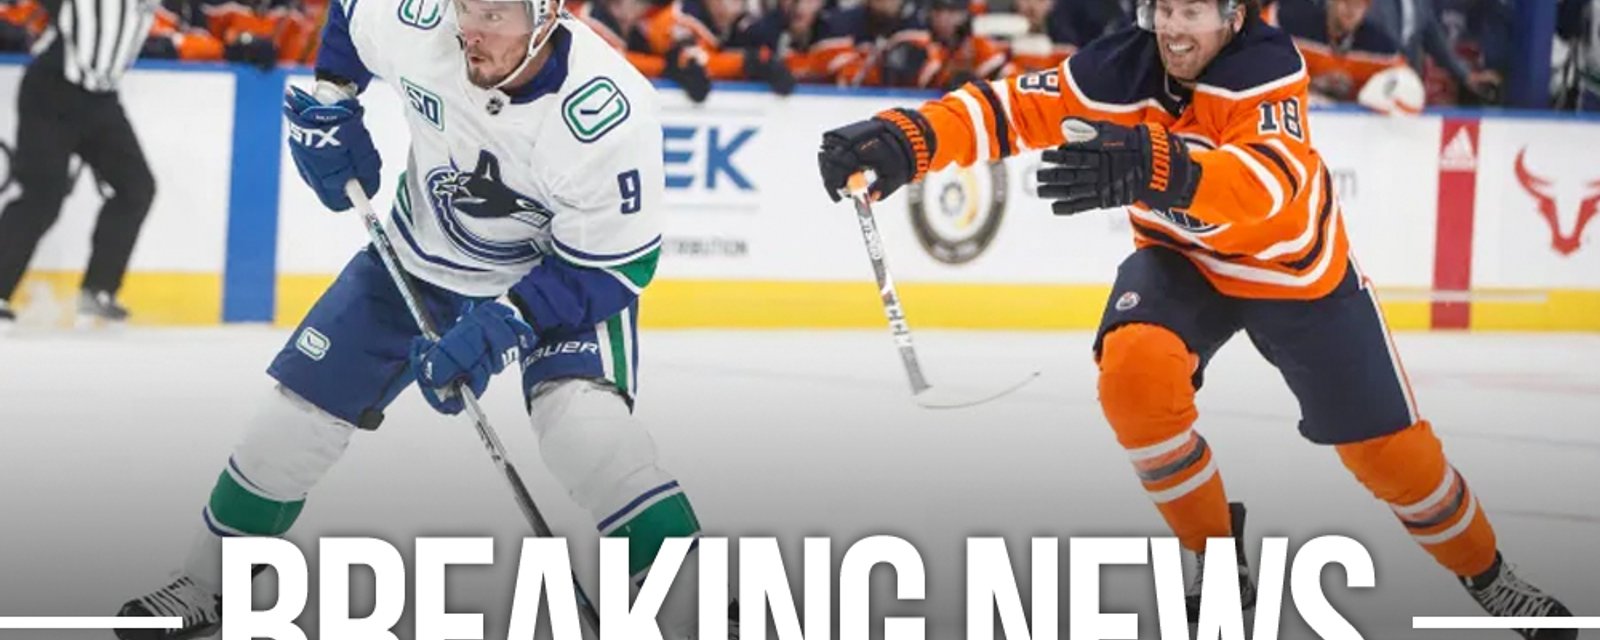 Tomorrow's Canucks vs Oilers game officially postponed